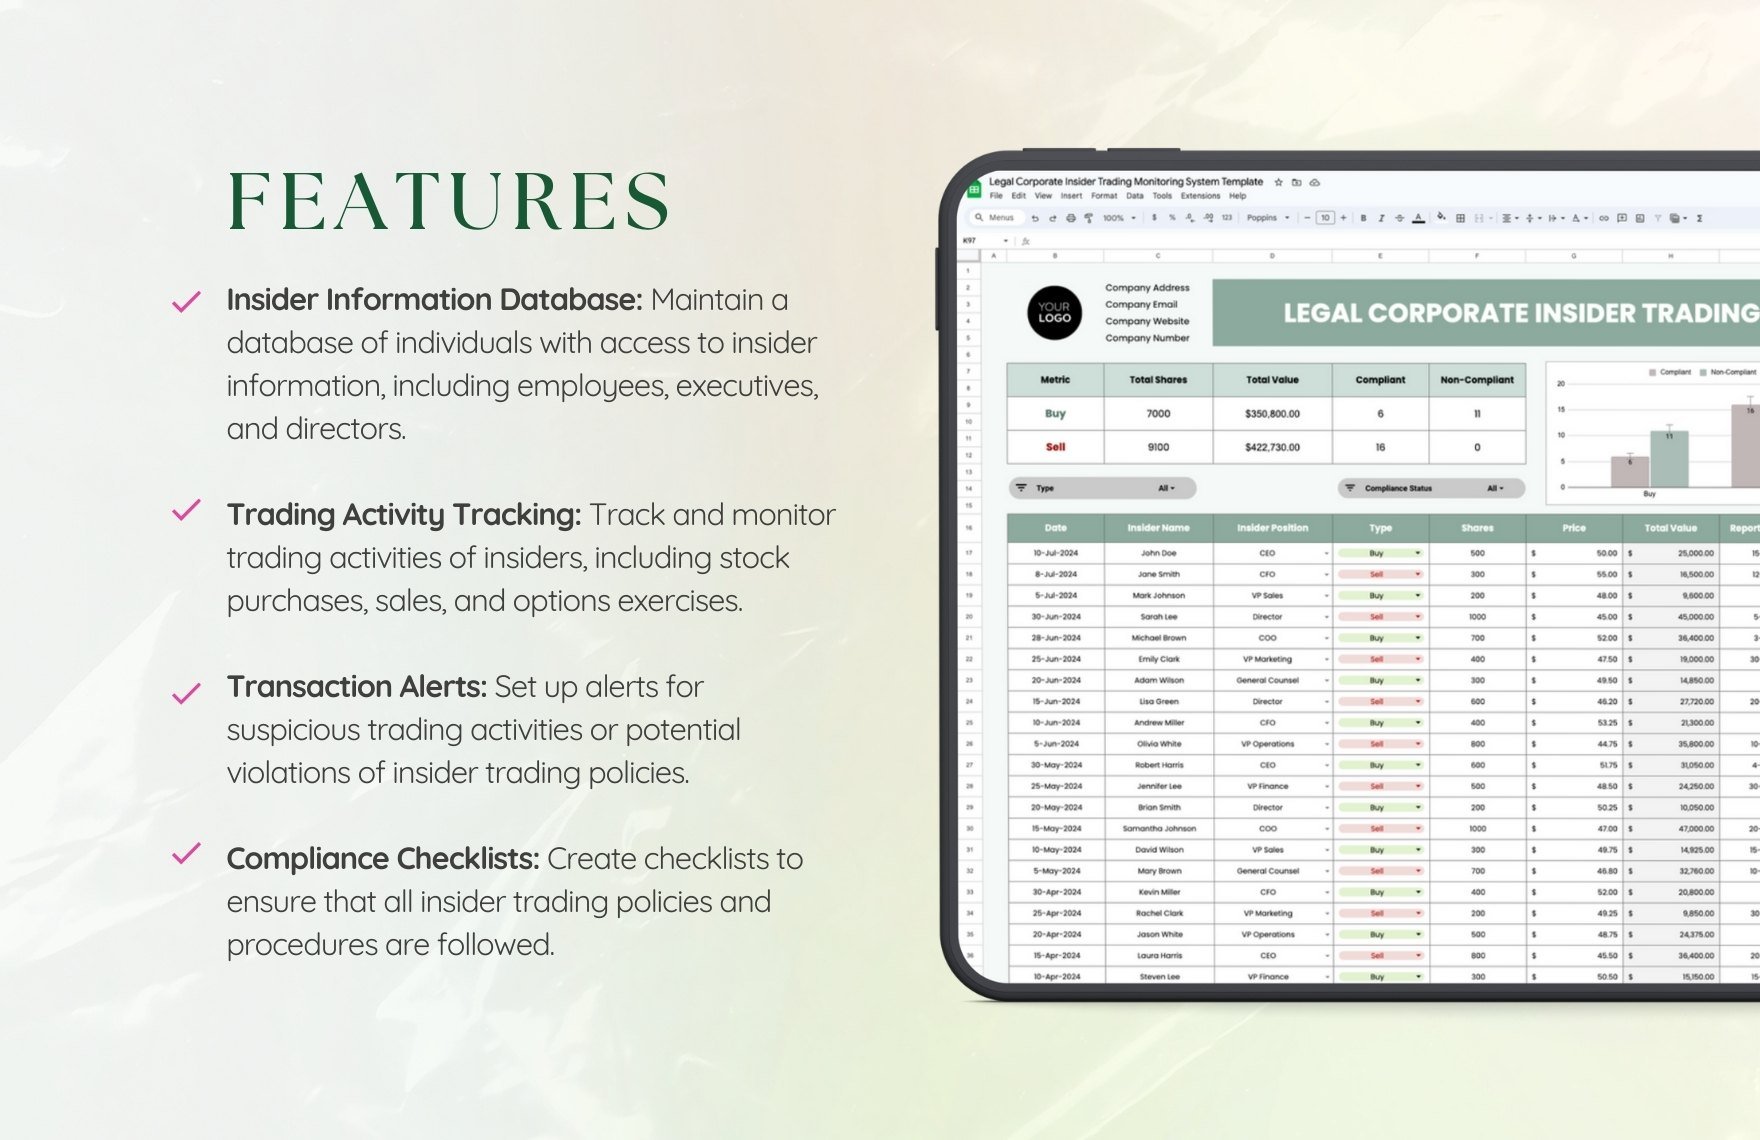 Legal Corporate Insider Trading Monitoring System Template